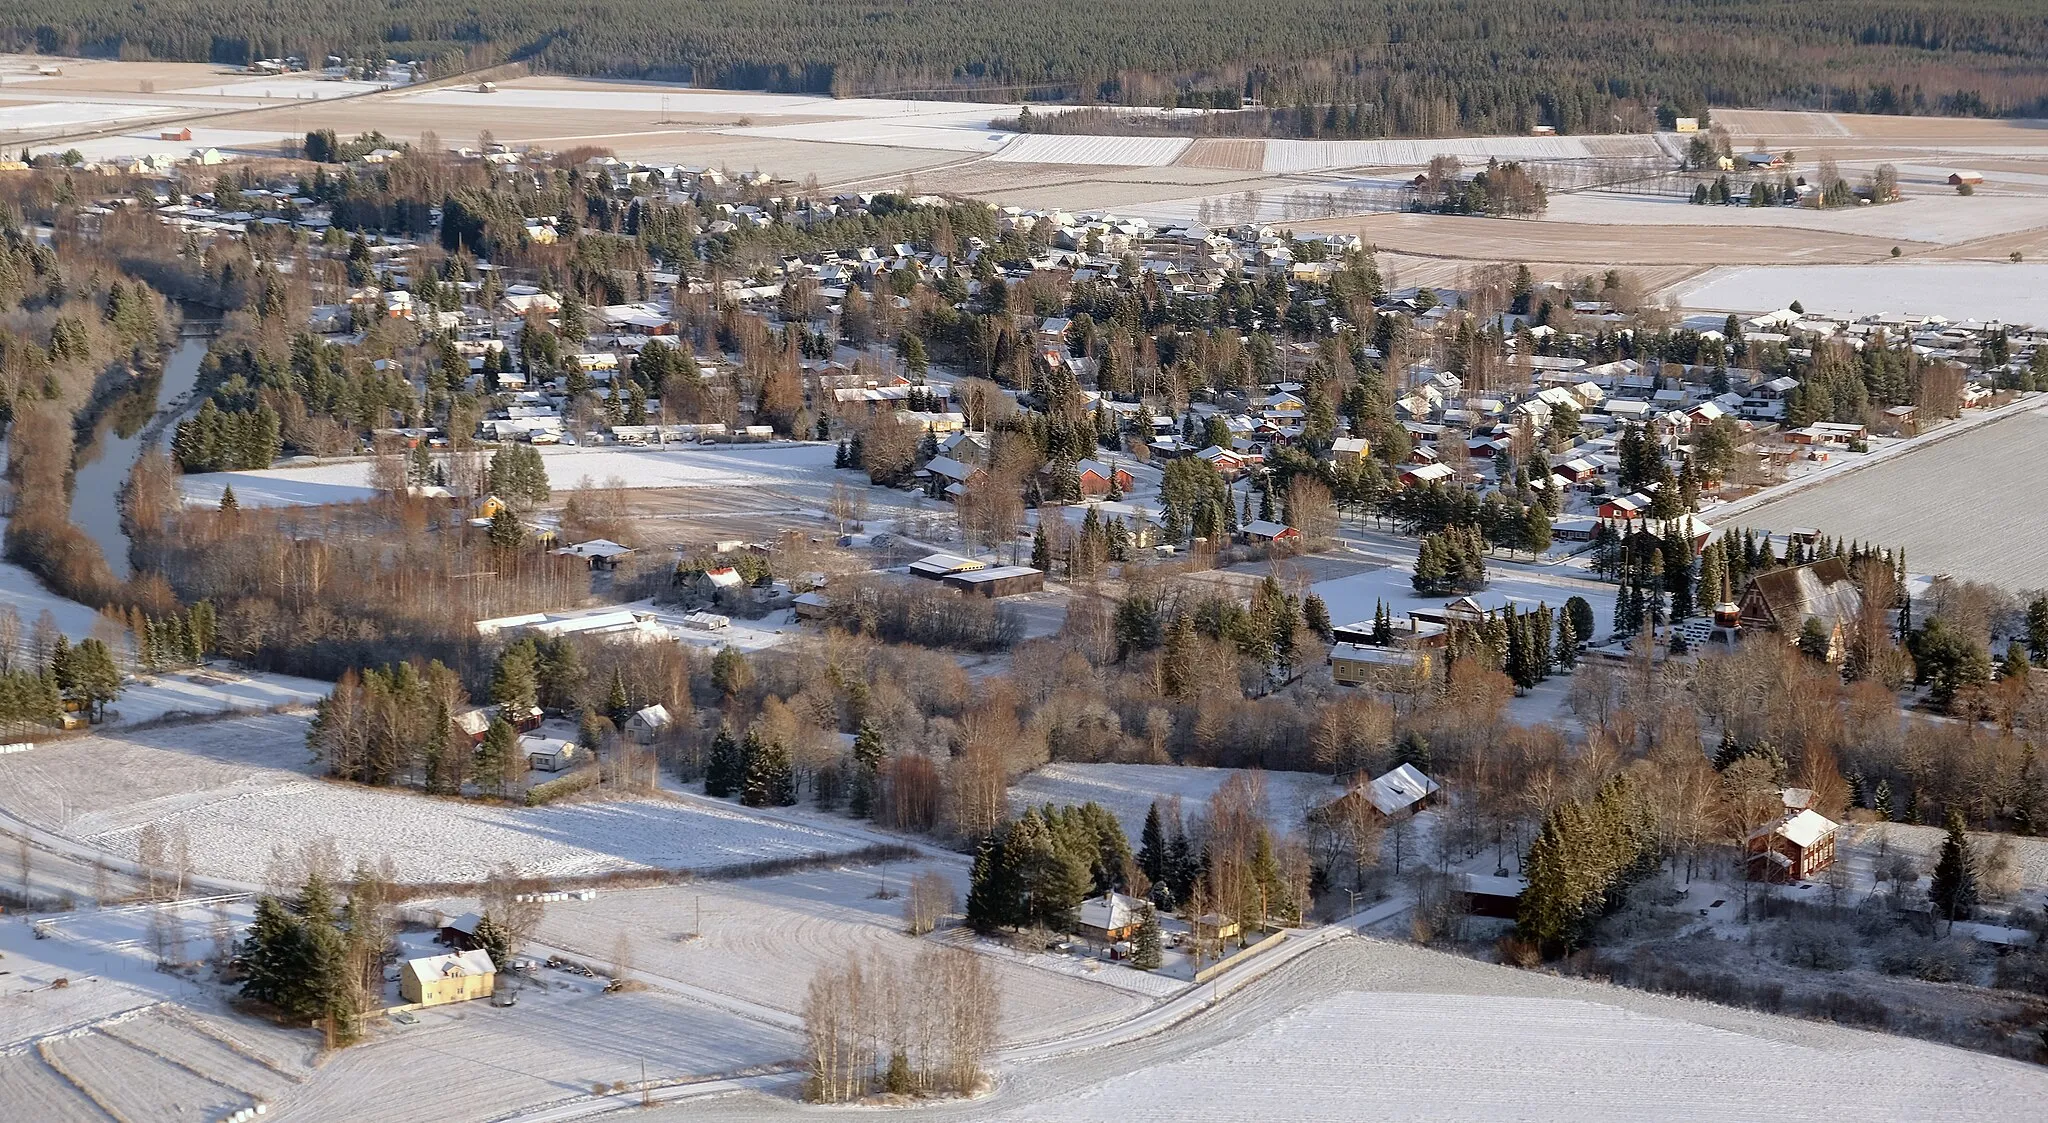 Photo showing: Aerial view of the Ulvilan kirkonseutu ('Ulvila's church area') looking northeast from above Saarenluoto. The Kirkkojuopa flows from left-top to right-bottom and the Saarentien silta ('Saari-road bridge') is near the meeting point of centre-middle and right-bottom. Ulvila Church and its cemetery can be seen at right-middle. Mynsteri residential area is in the middle-ground. Valtatie 11 ('Highway 11') cuts across left-top in the distance. Note: Image placements assume overlay of grid comprising three columns (left, centre, right) and three rows (top, middle, bottom) to create nine cells of identical dimension.